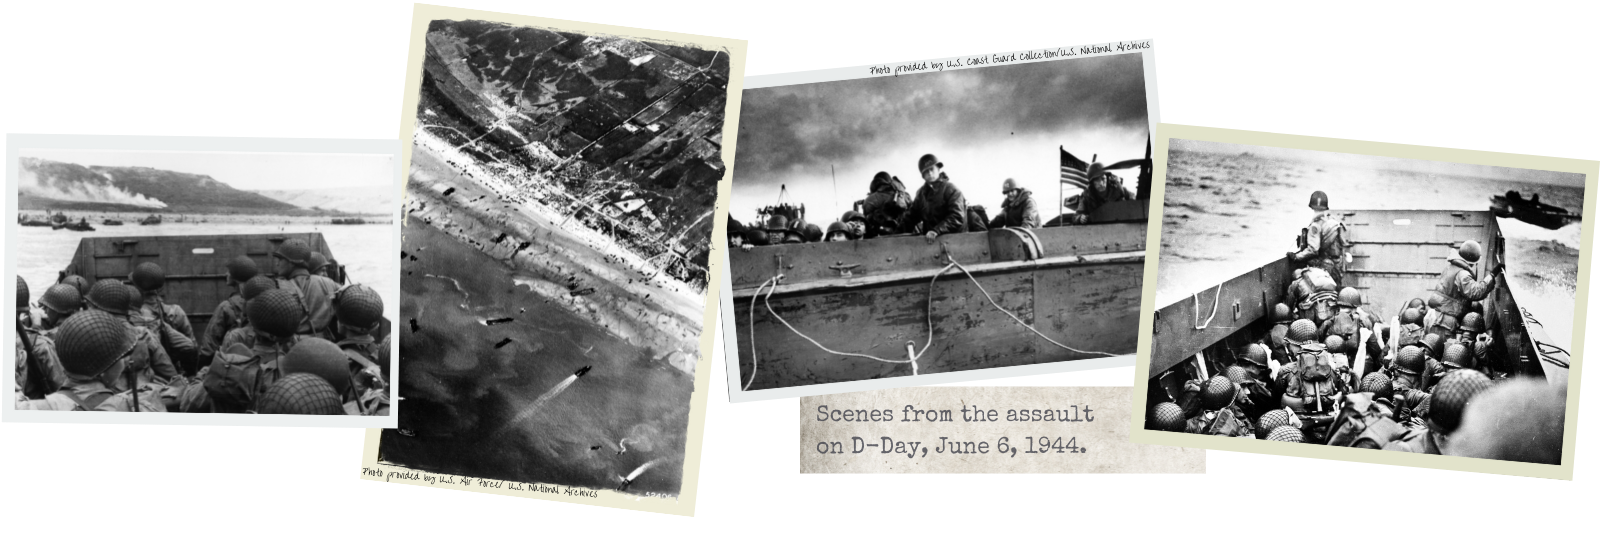 Composite image of DDay photographs